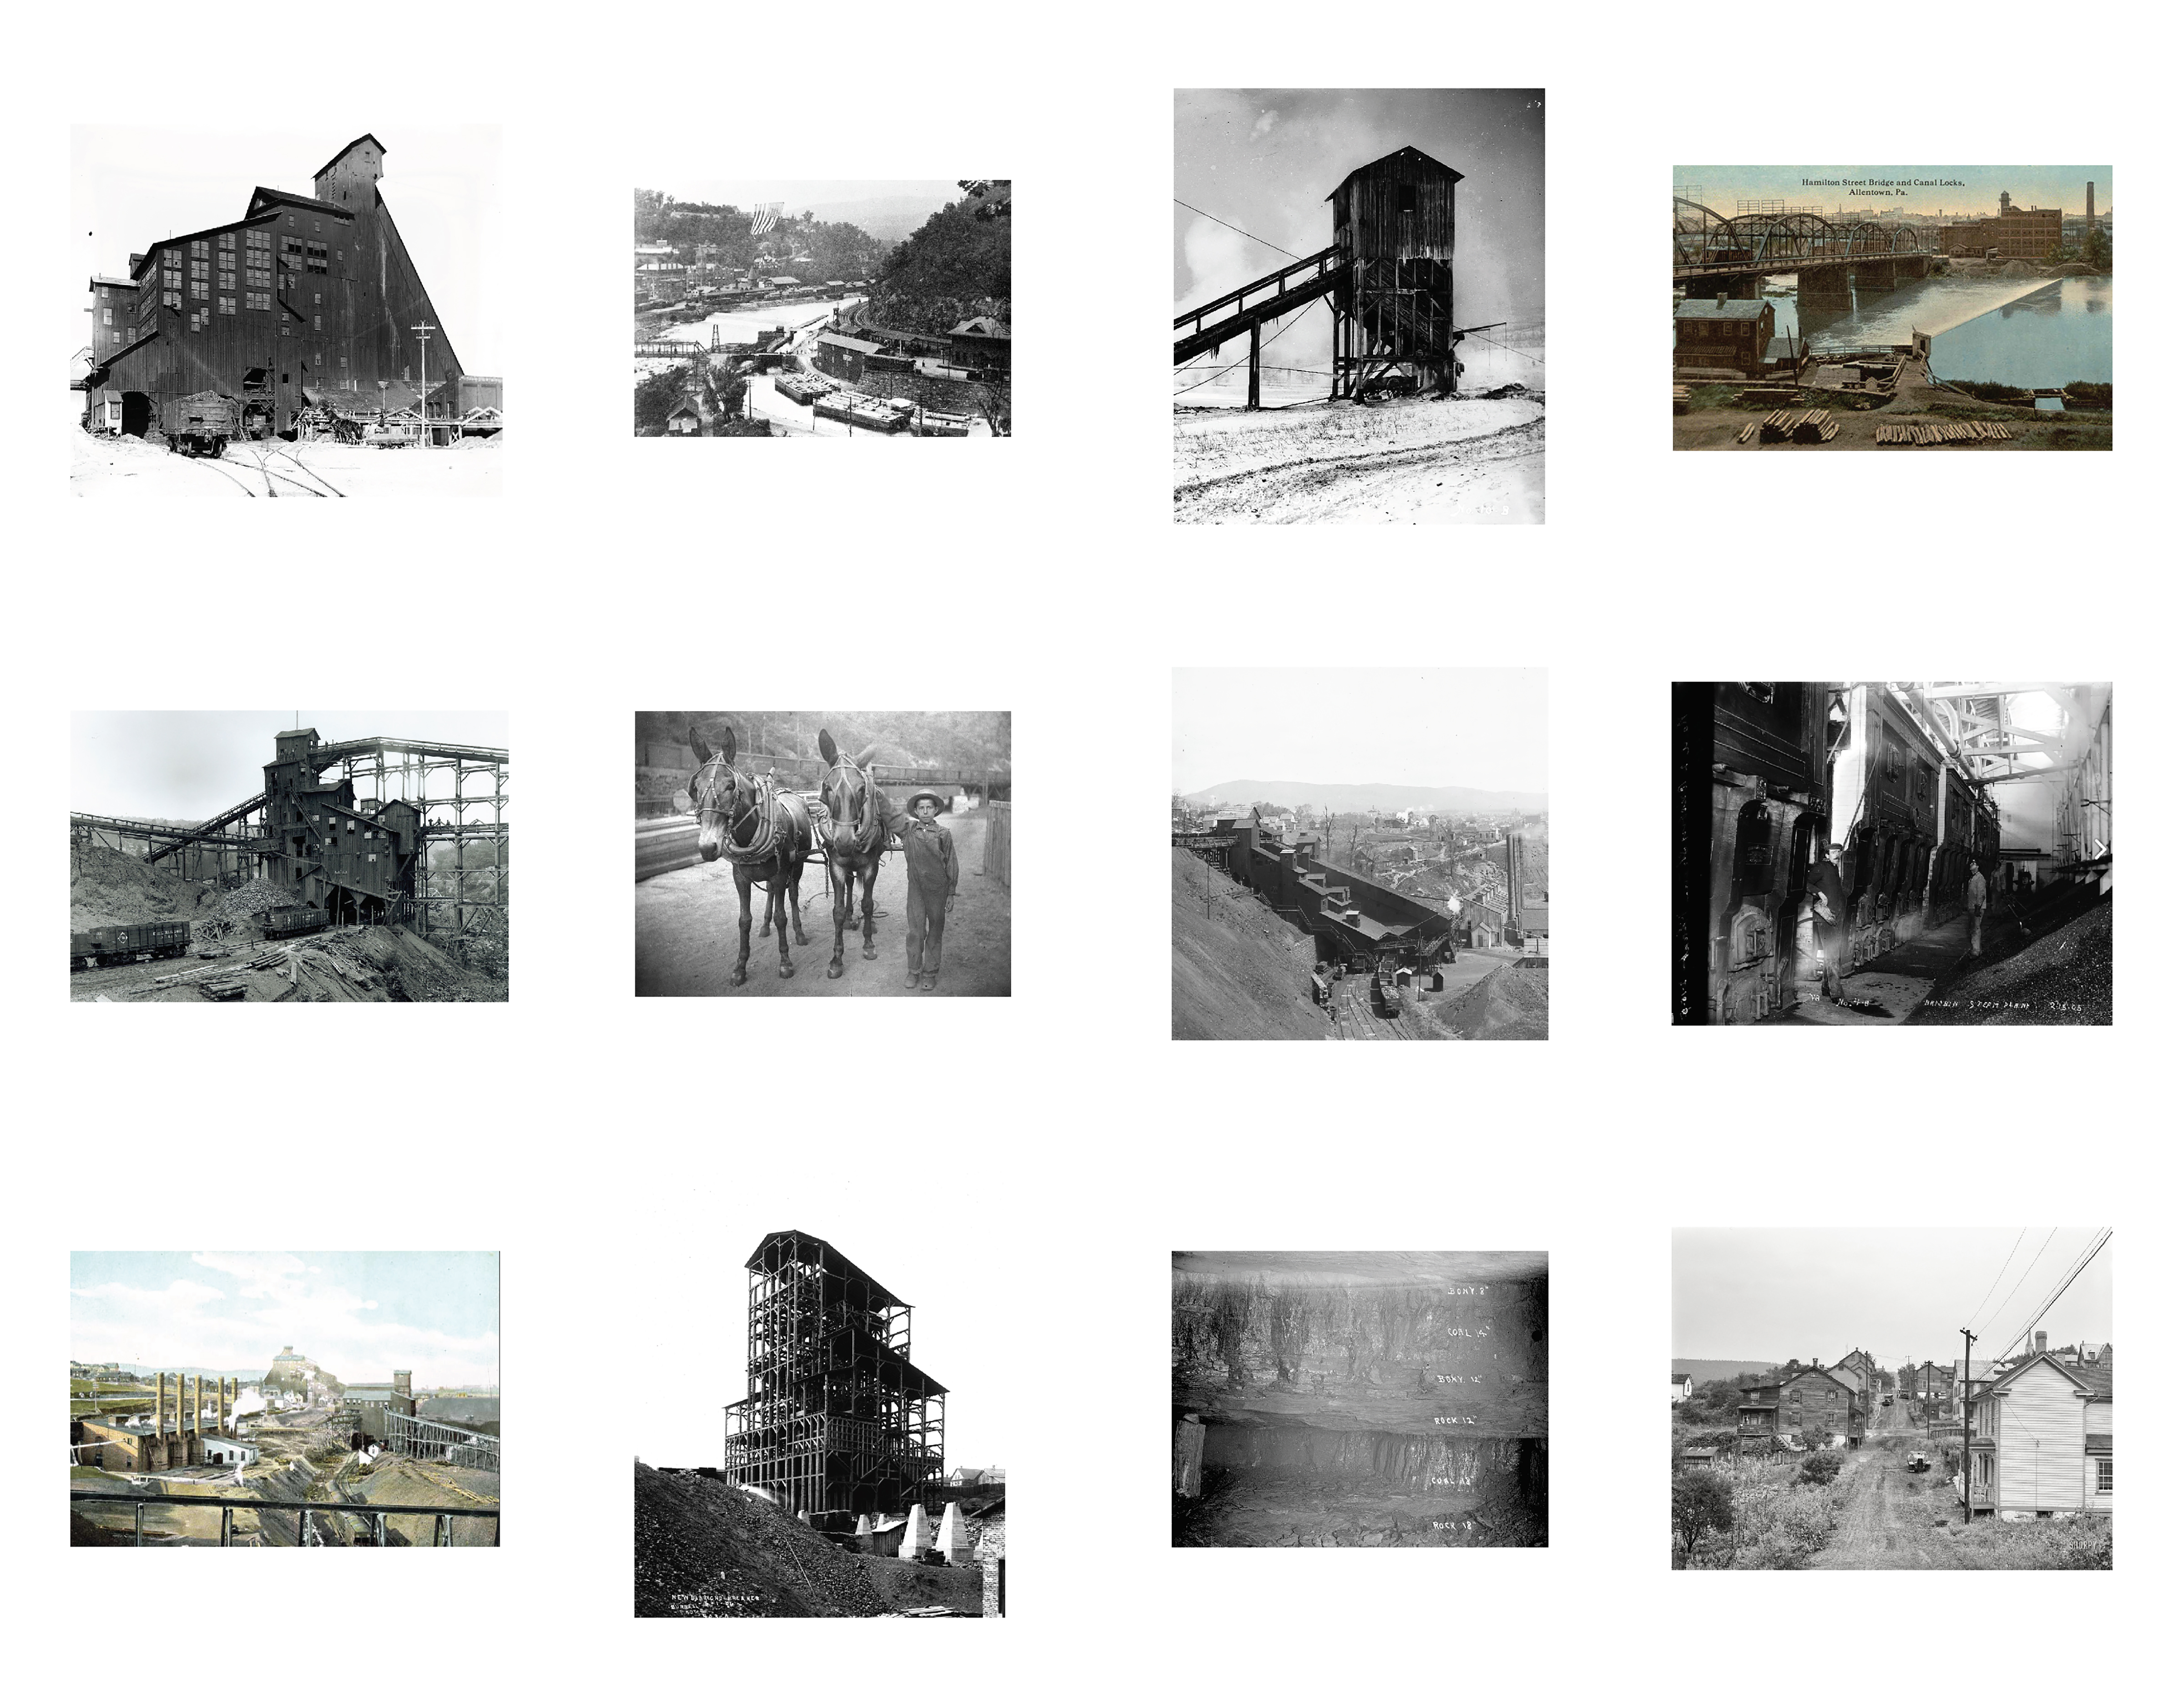 A grid of twelve photographs, mostly black and white, showing scenes related to 19th century coal production